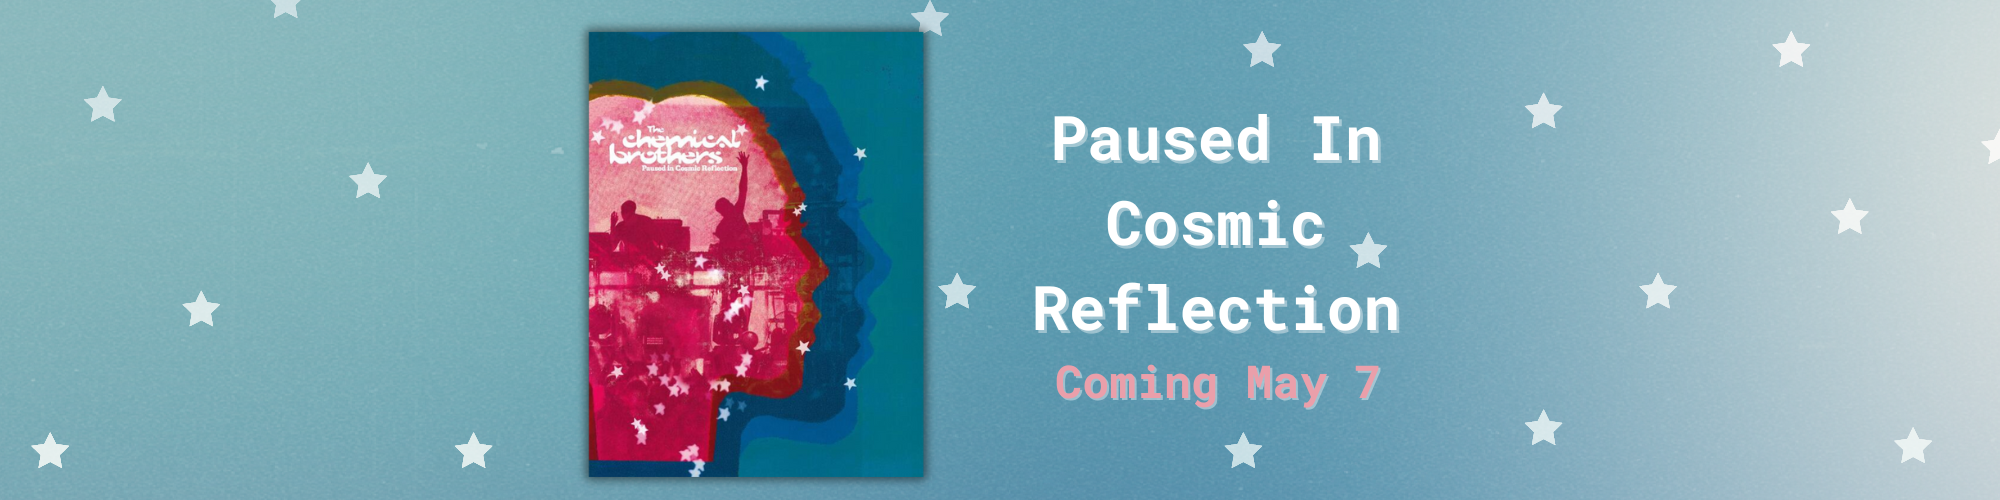 Draft 2 Paused In Cosmic Reflection - Website Banner (1).png